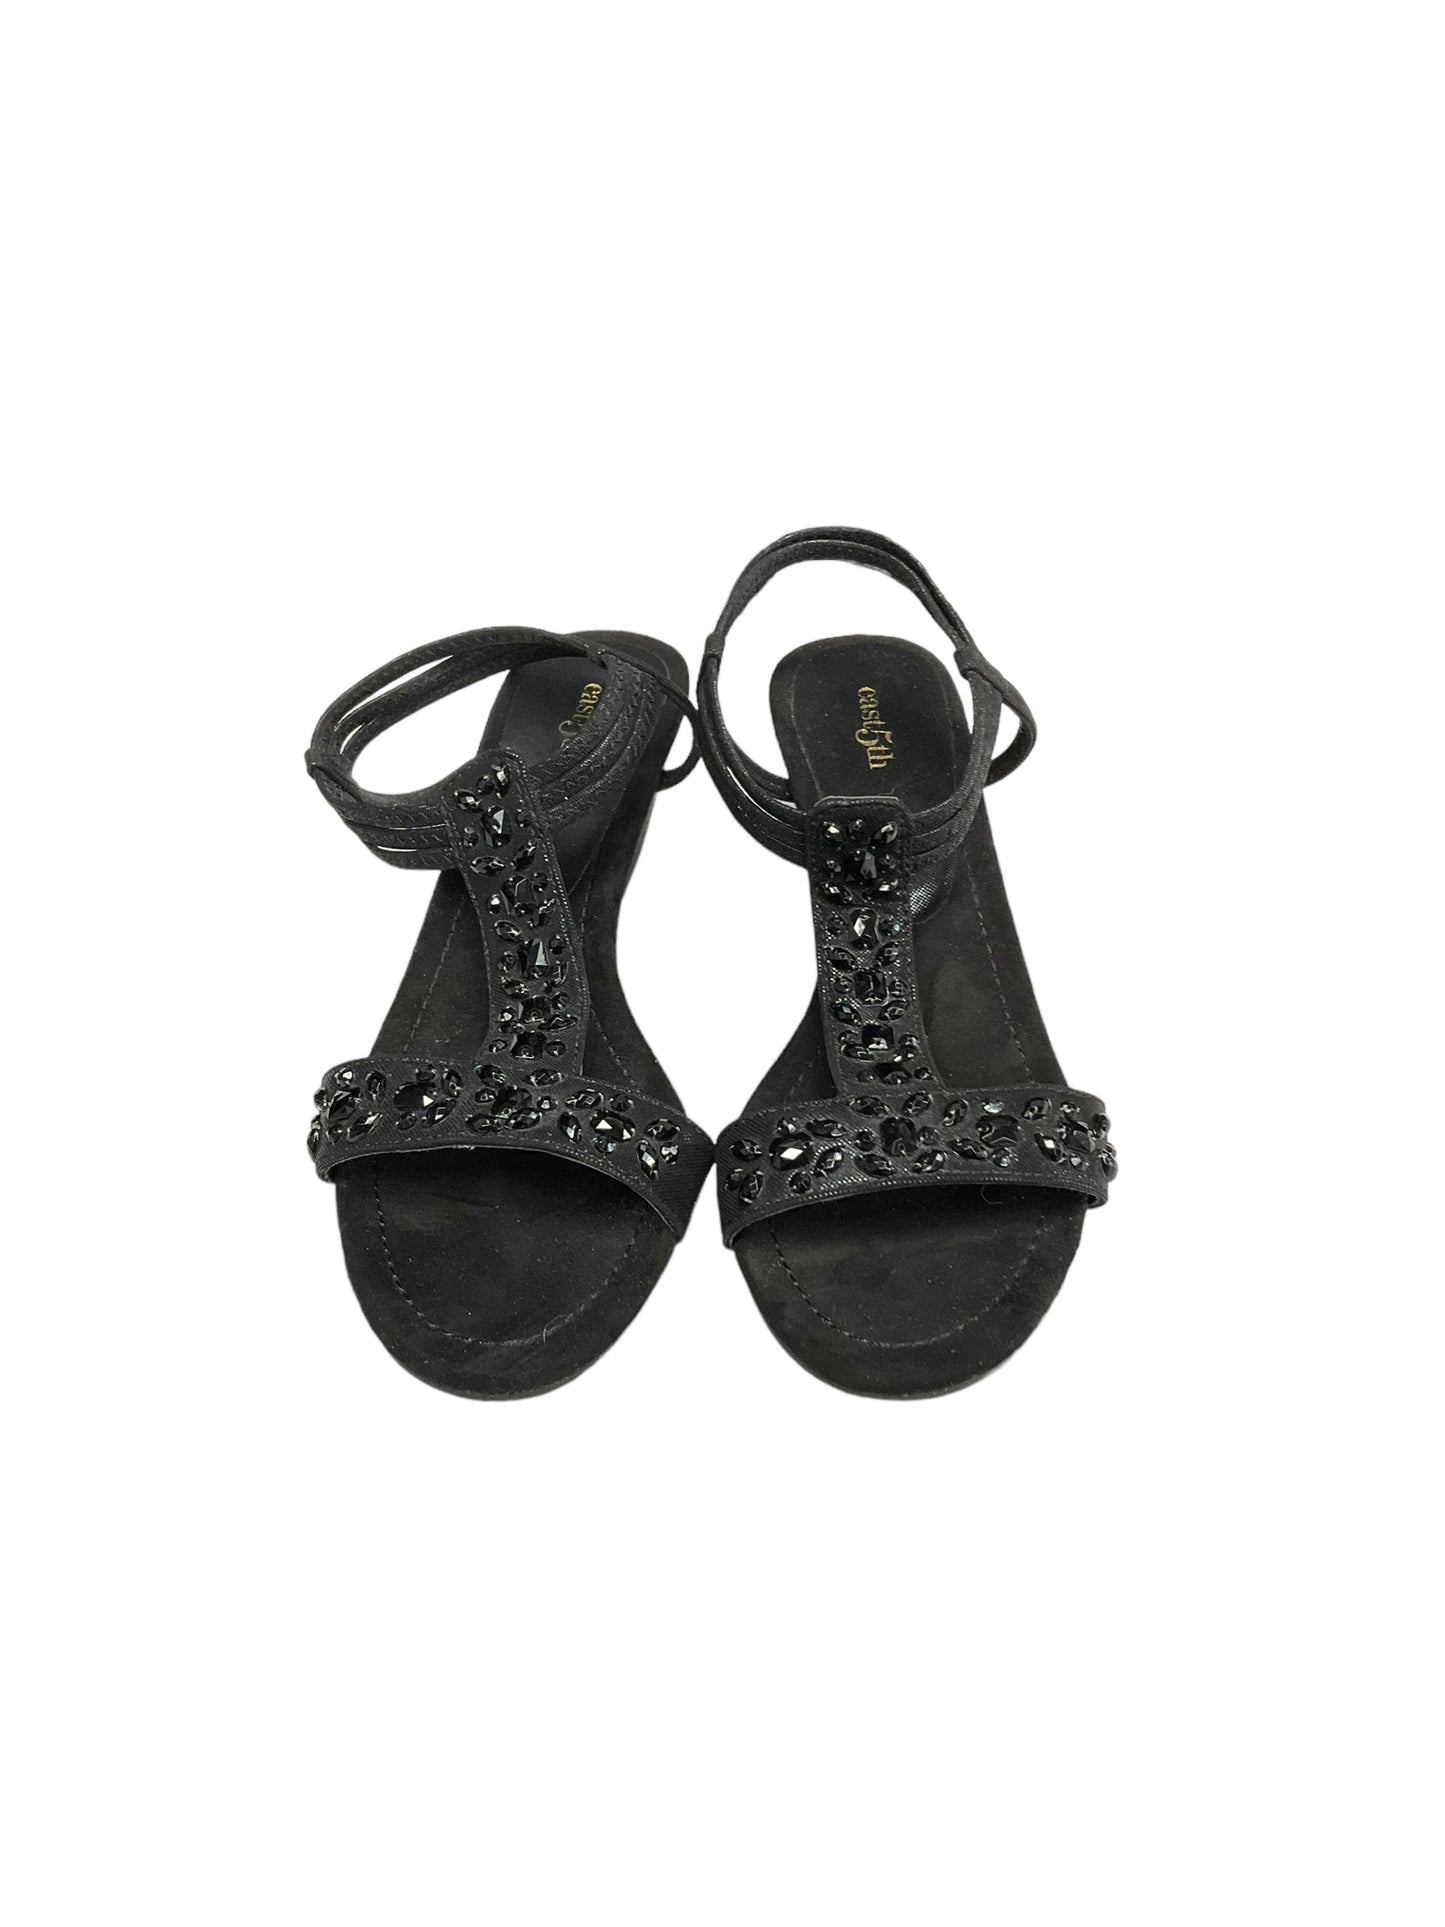 Shoes Heels Wedge By East 5th  Size: 8